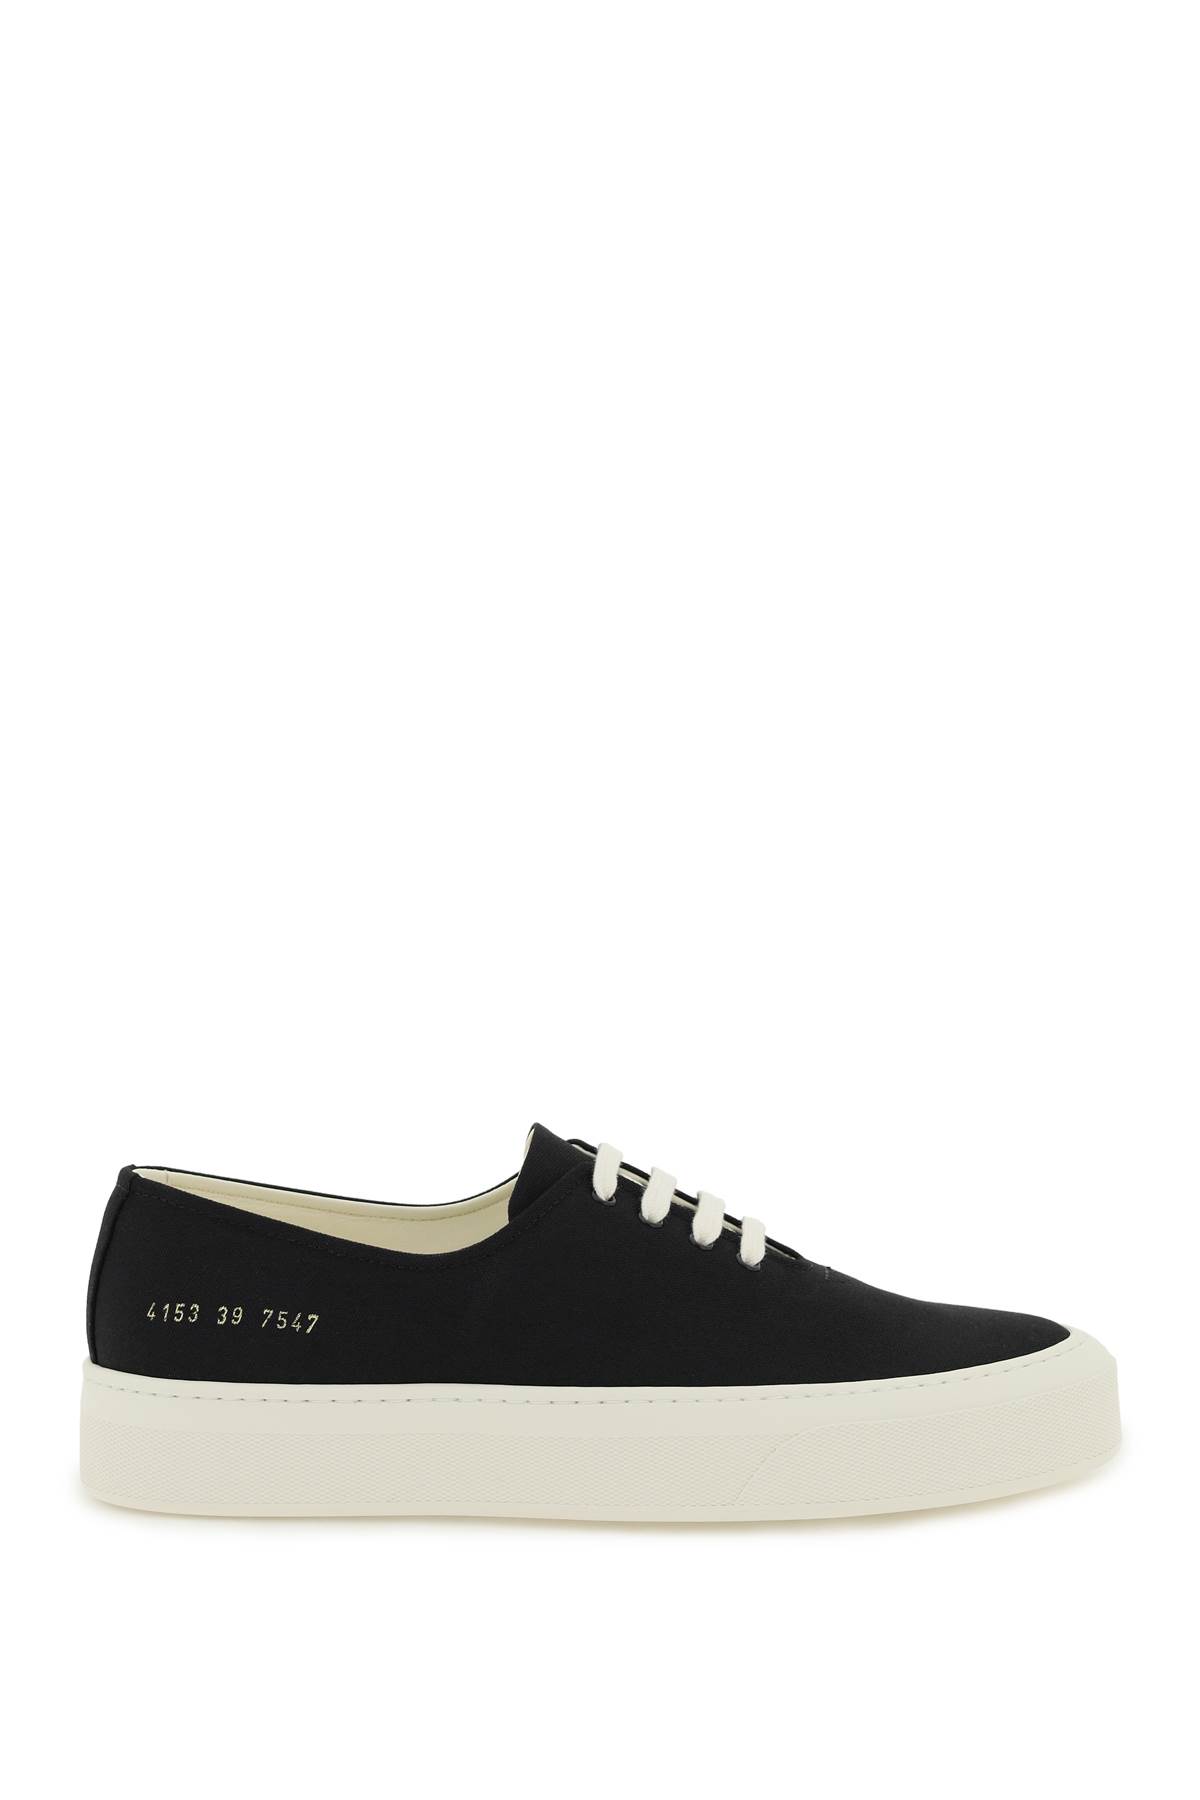 Common Projects Canvas Sneakers